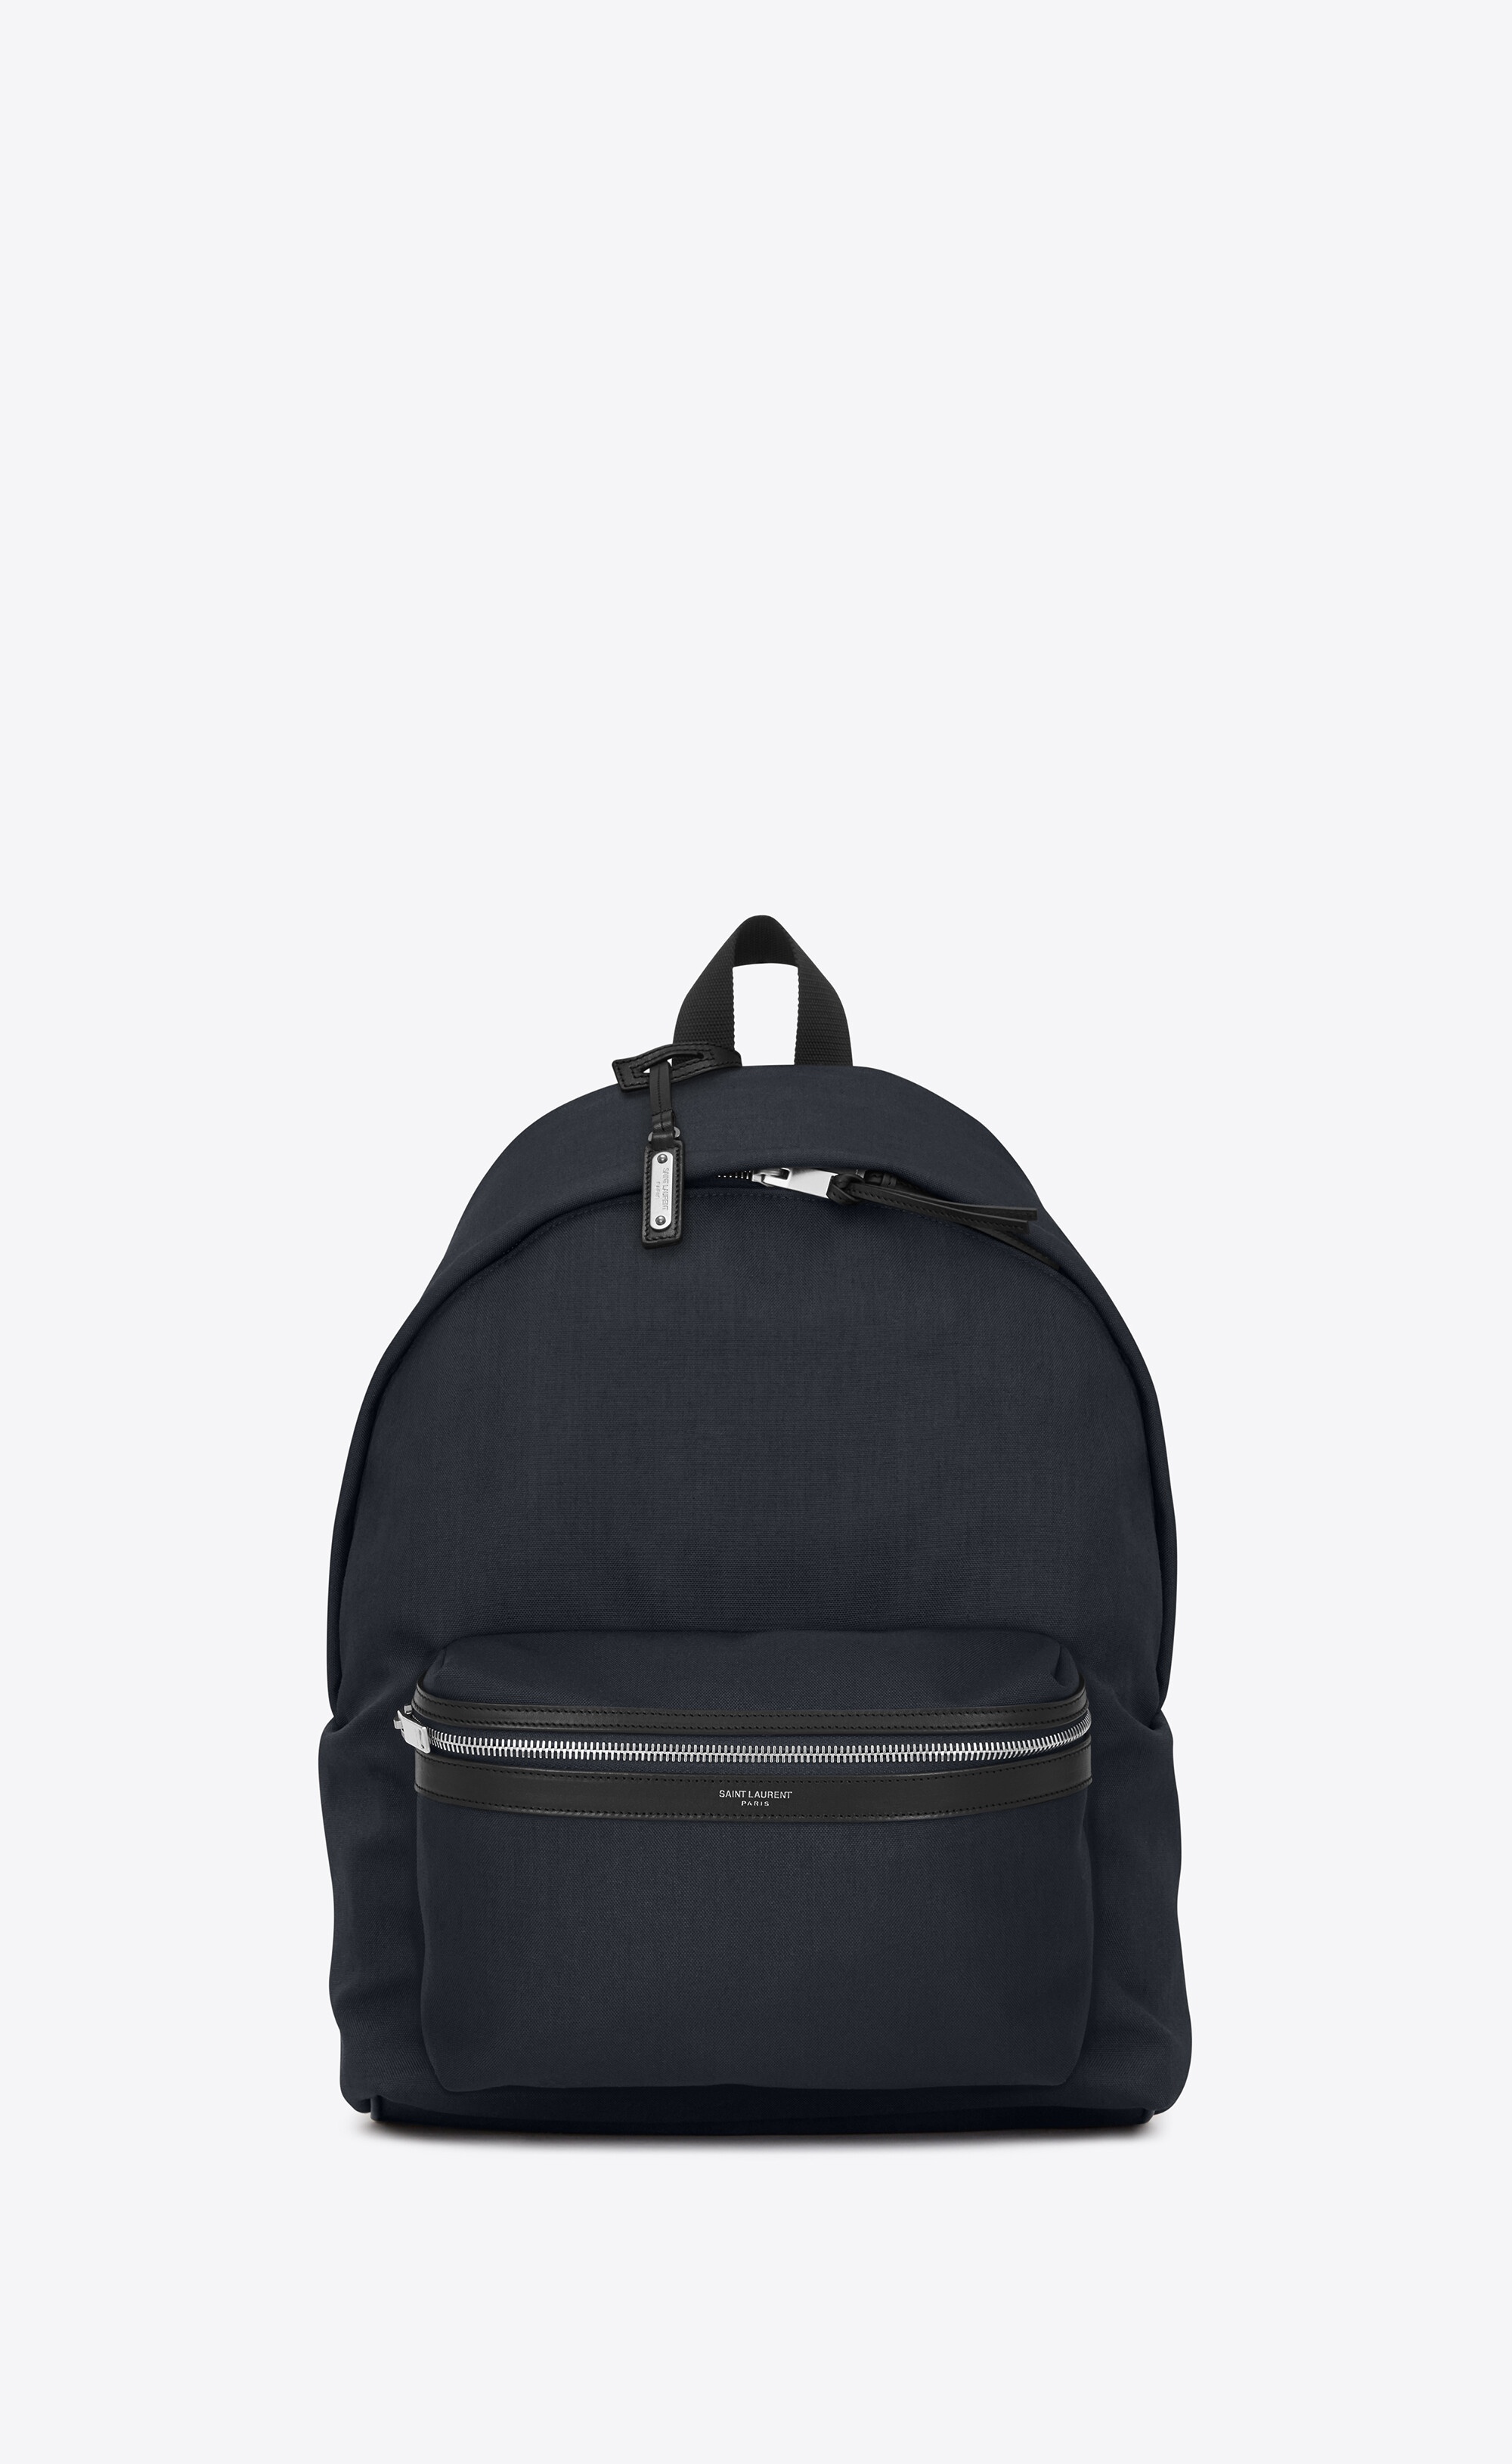 City leather-trimmed backpack